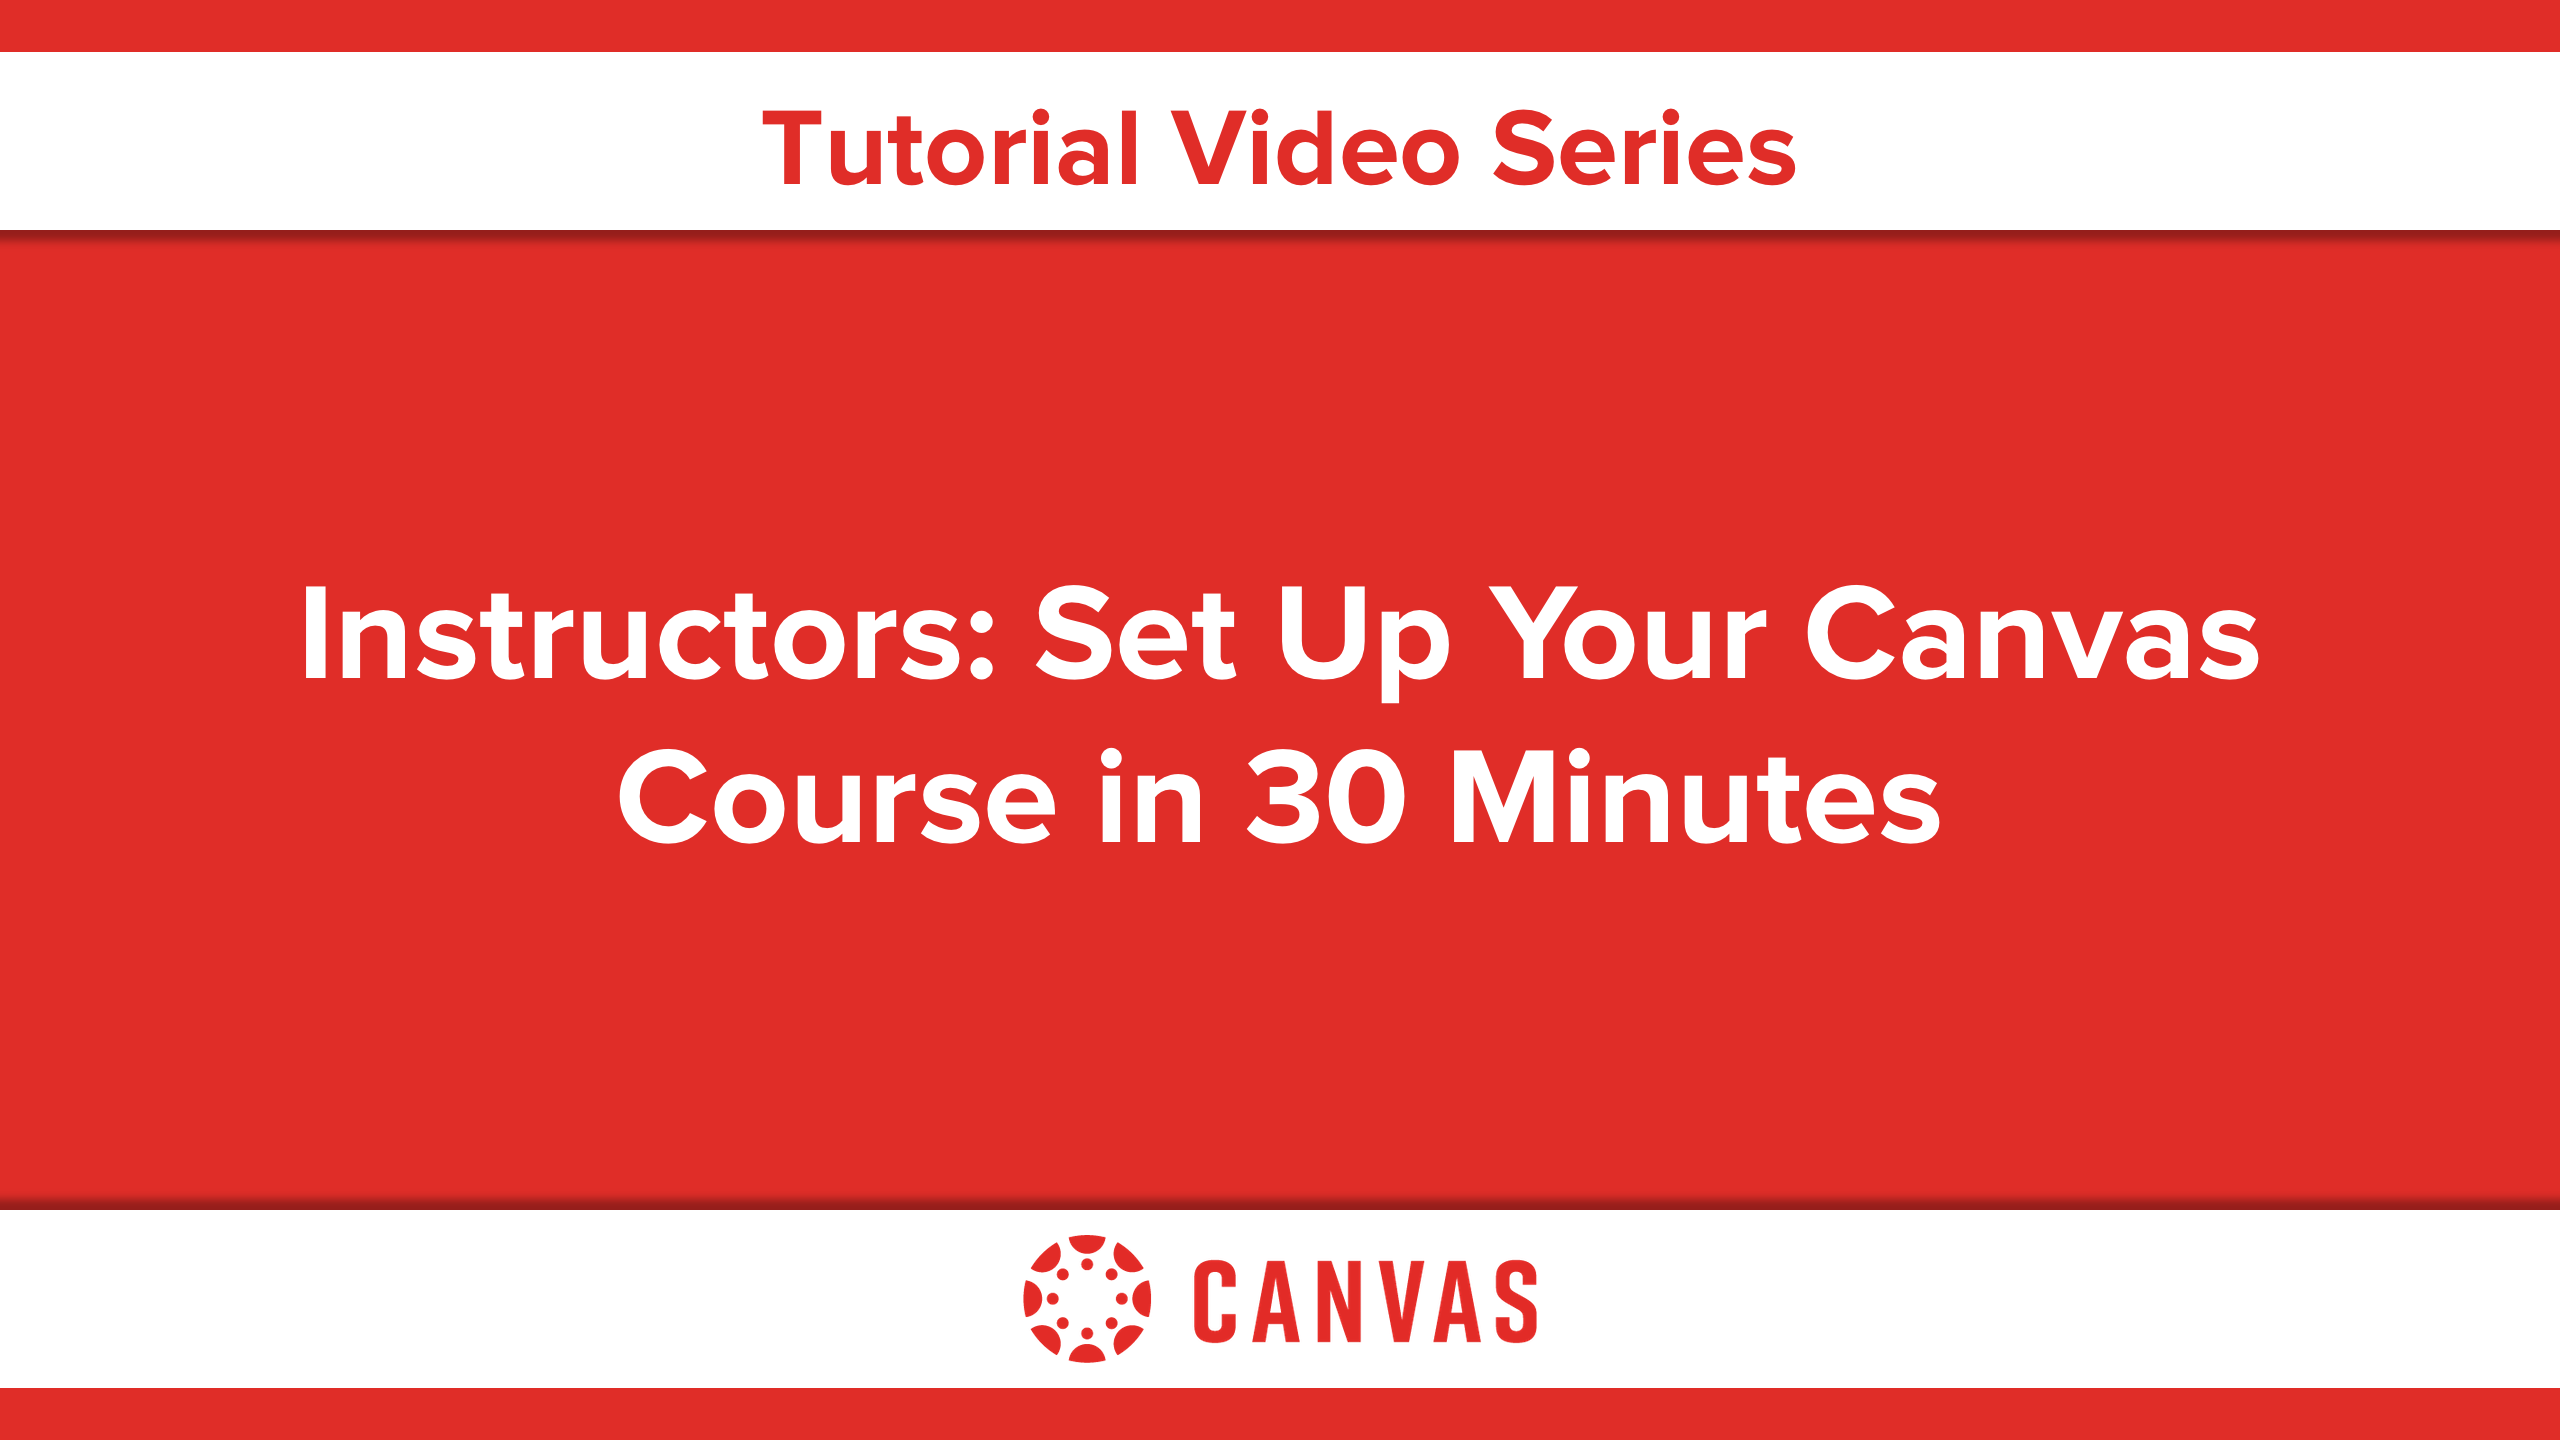 Set up your course in 30 minutes or less